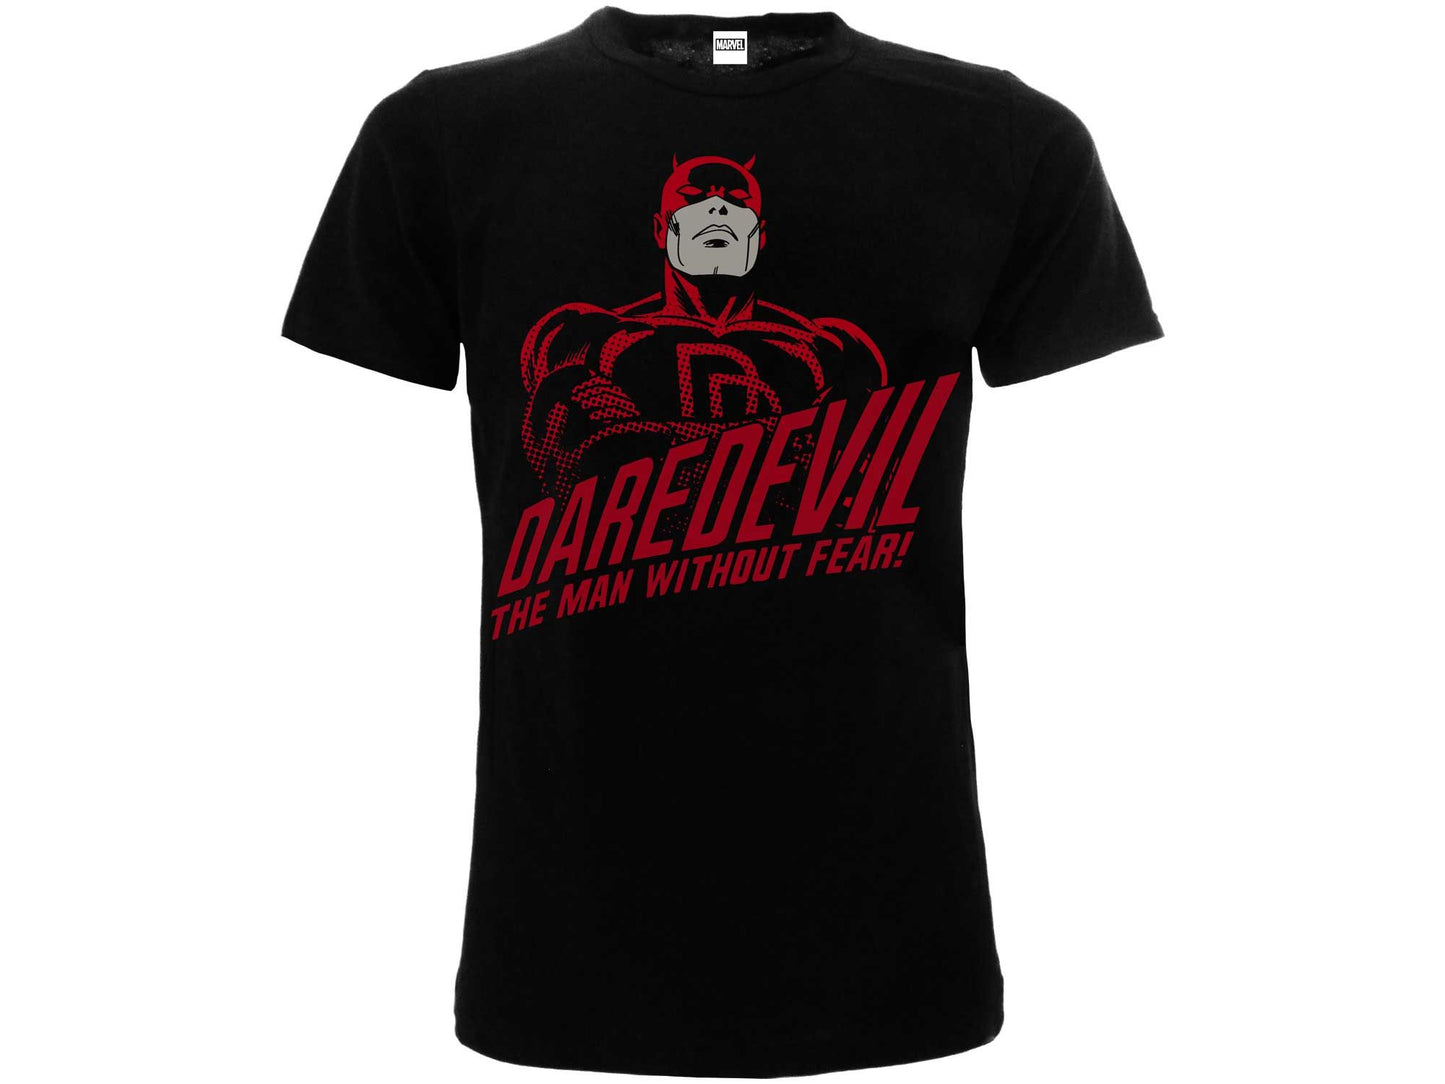 T-Shirt Daredevil The Man Without Fear!